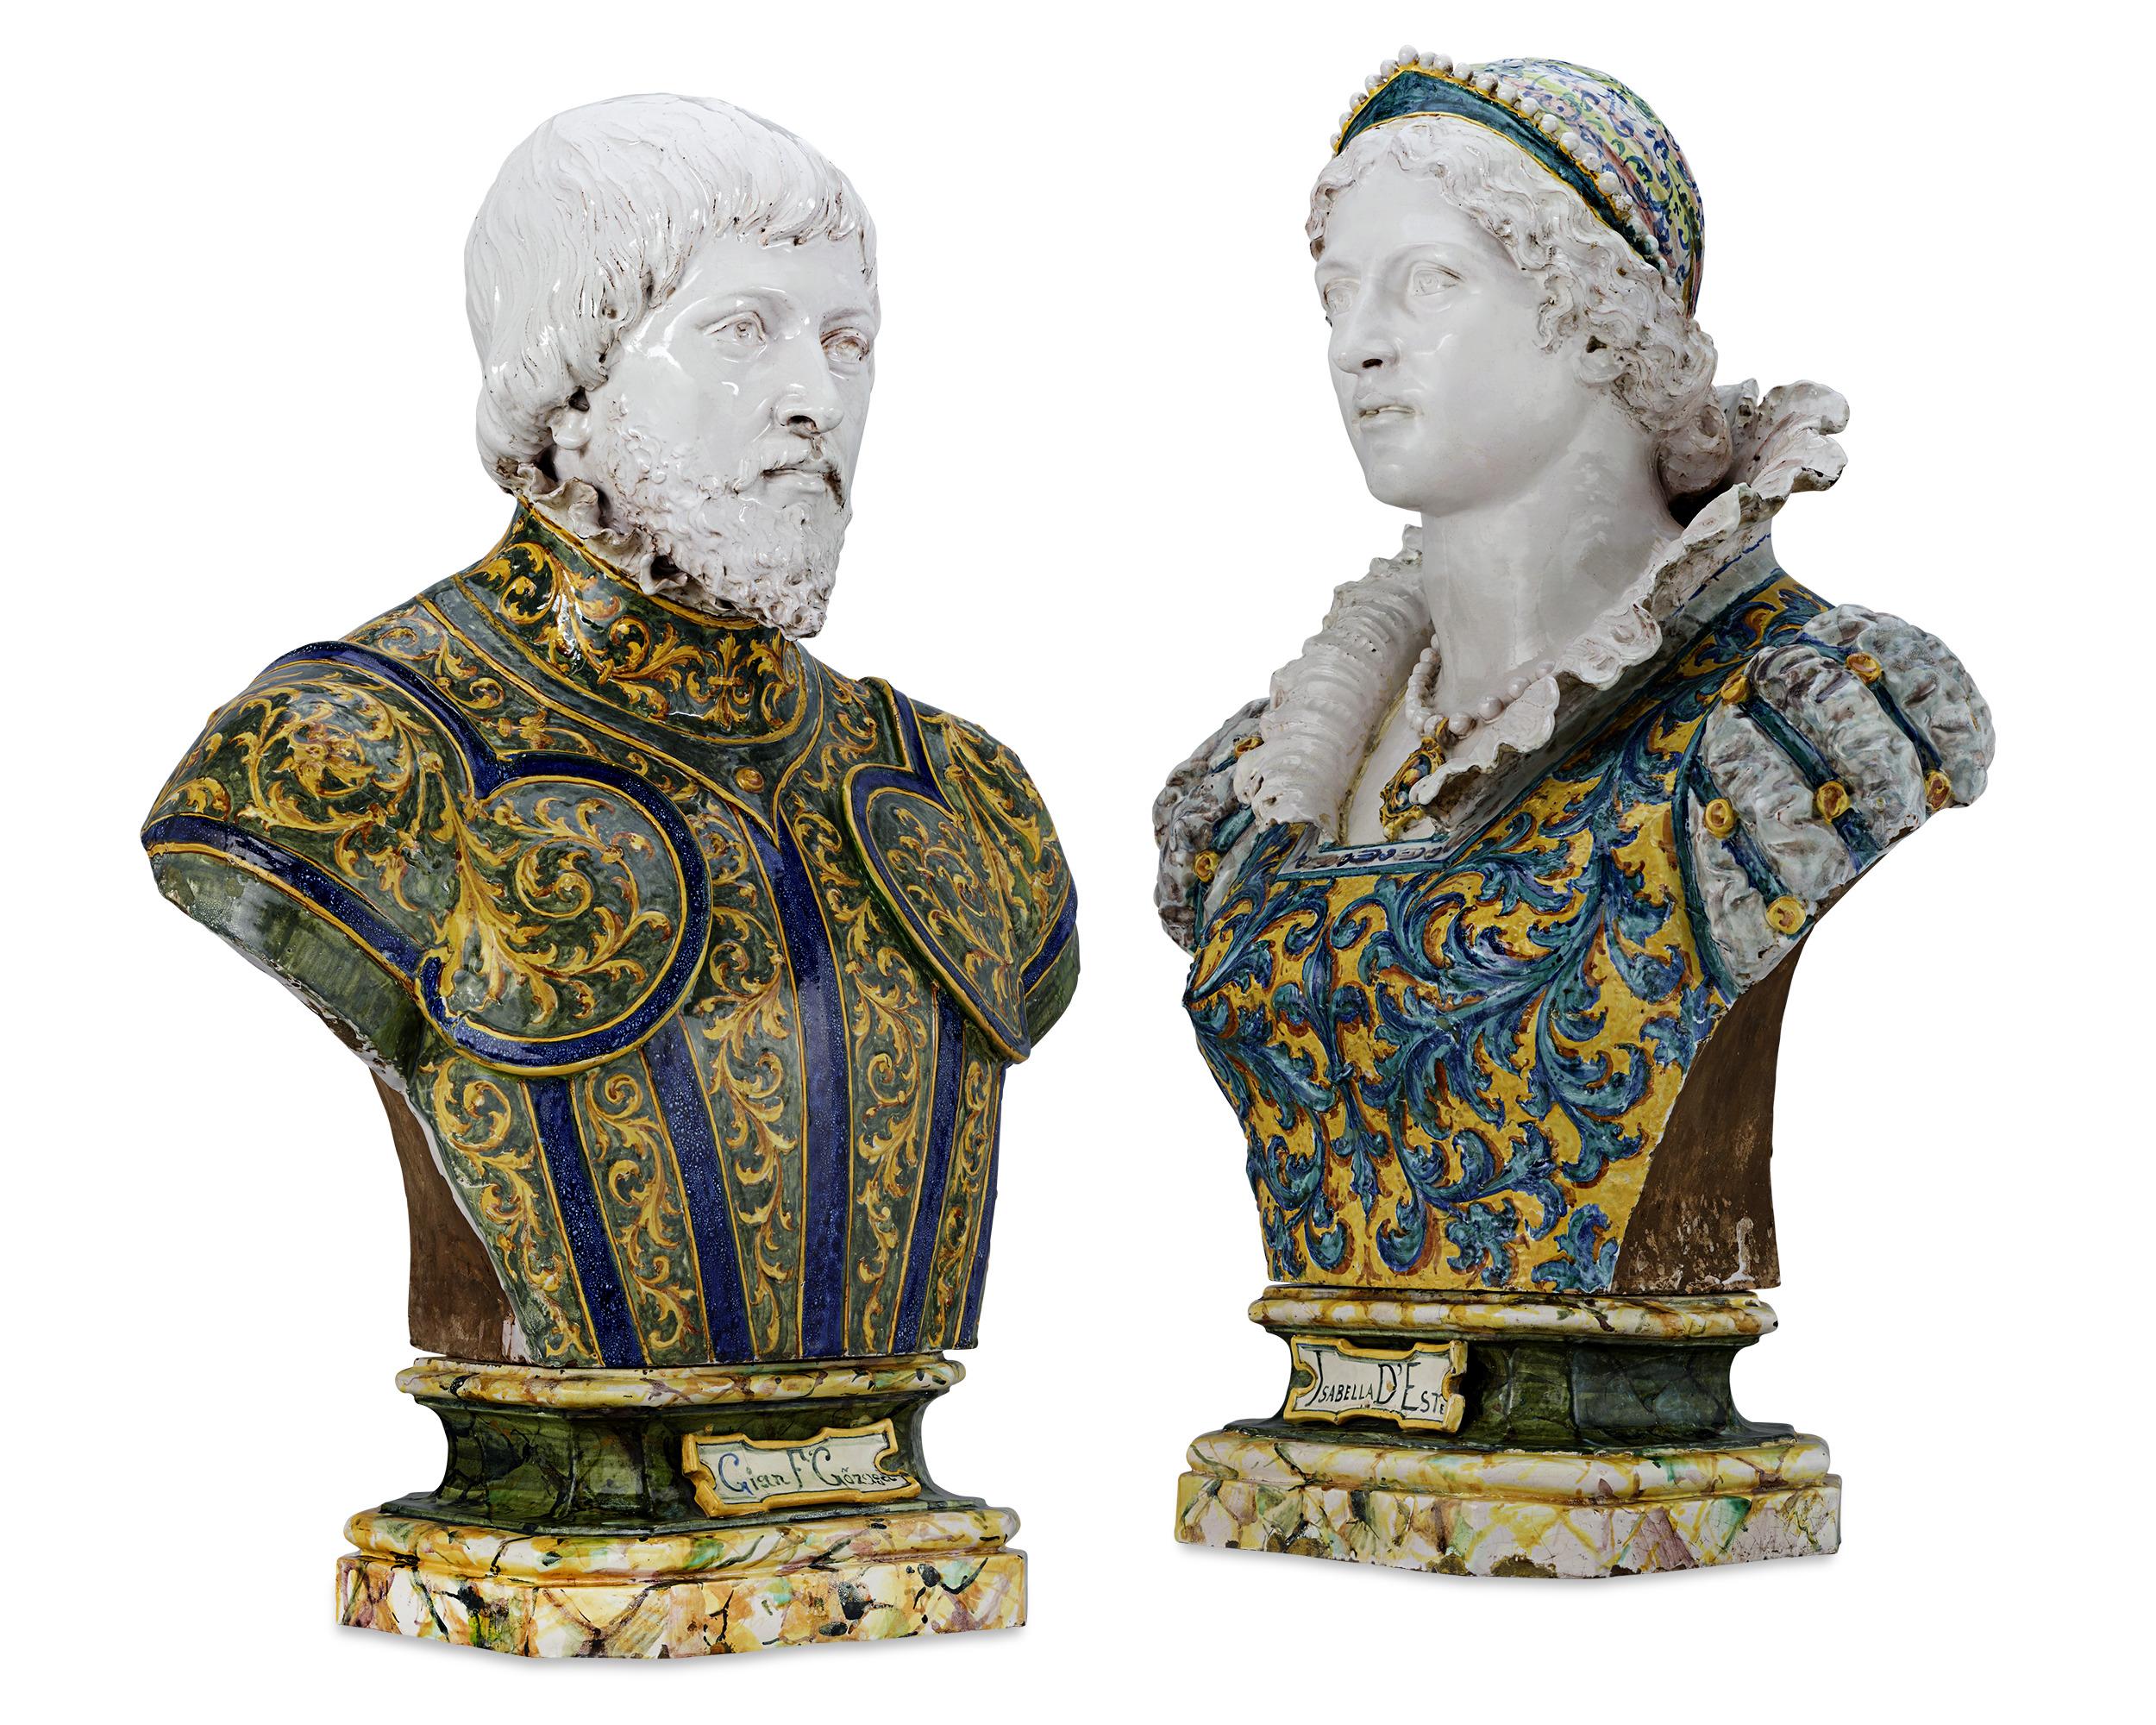 These two busts, monumental in both their size and artistry, come from the renowned Italian majolica workshop of the famed Angelo Minghetti. Depicted are the Renaissance political and cultural leaders Marquess and Marchioness of Mantua, Francesco II